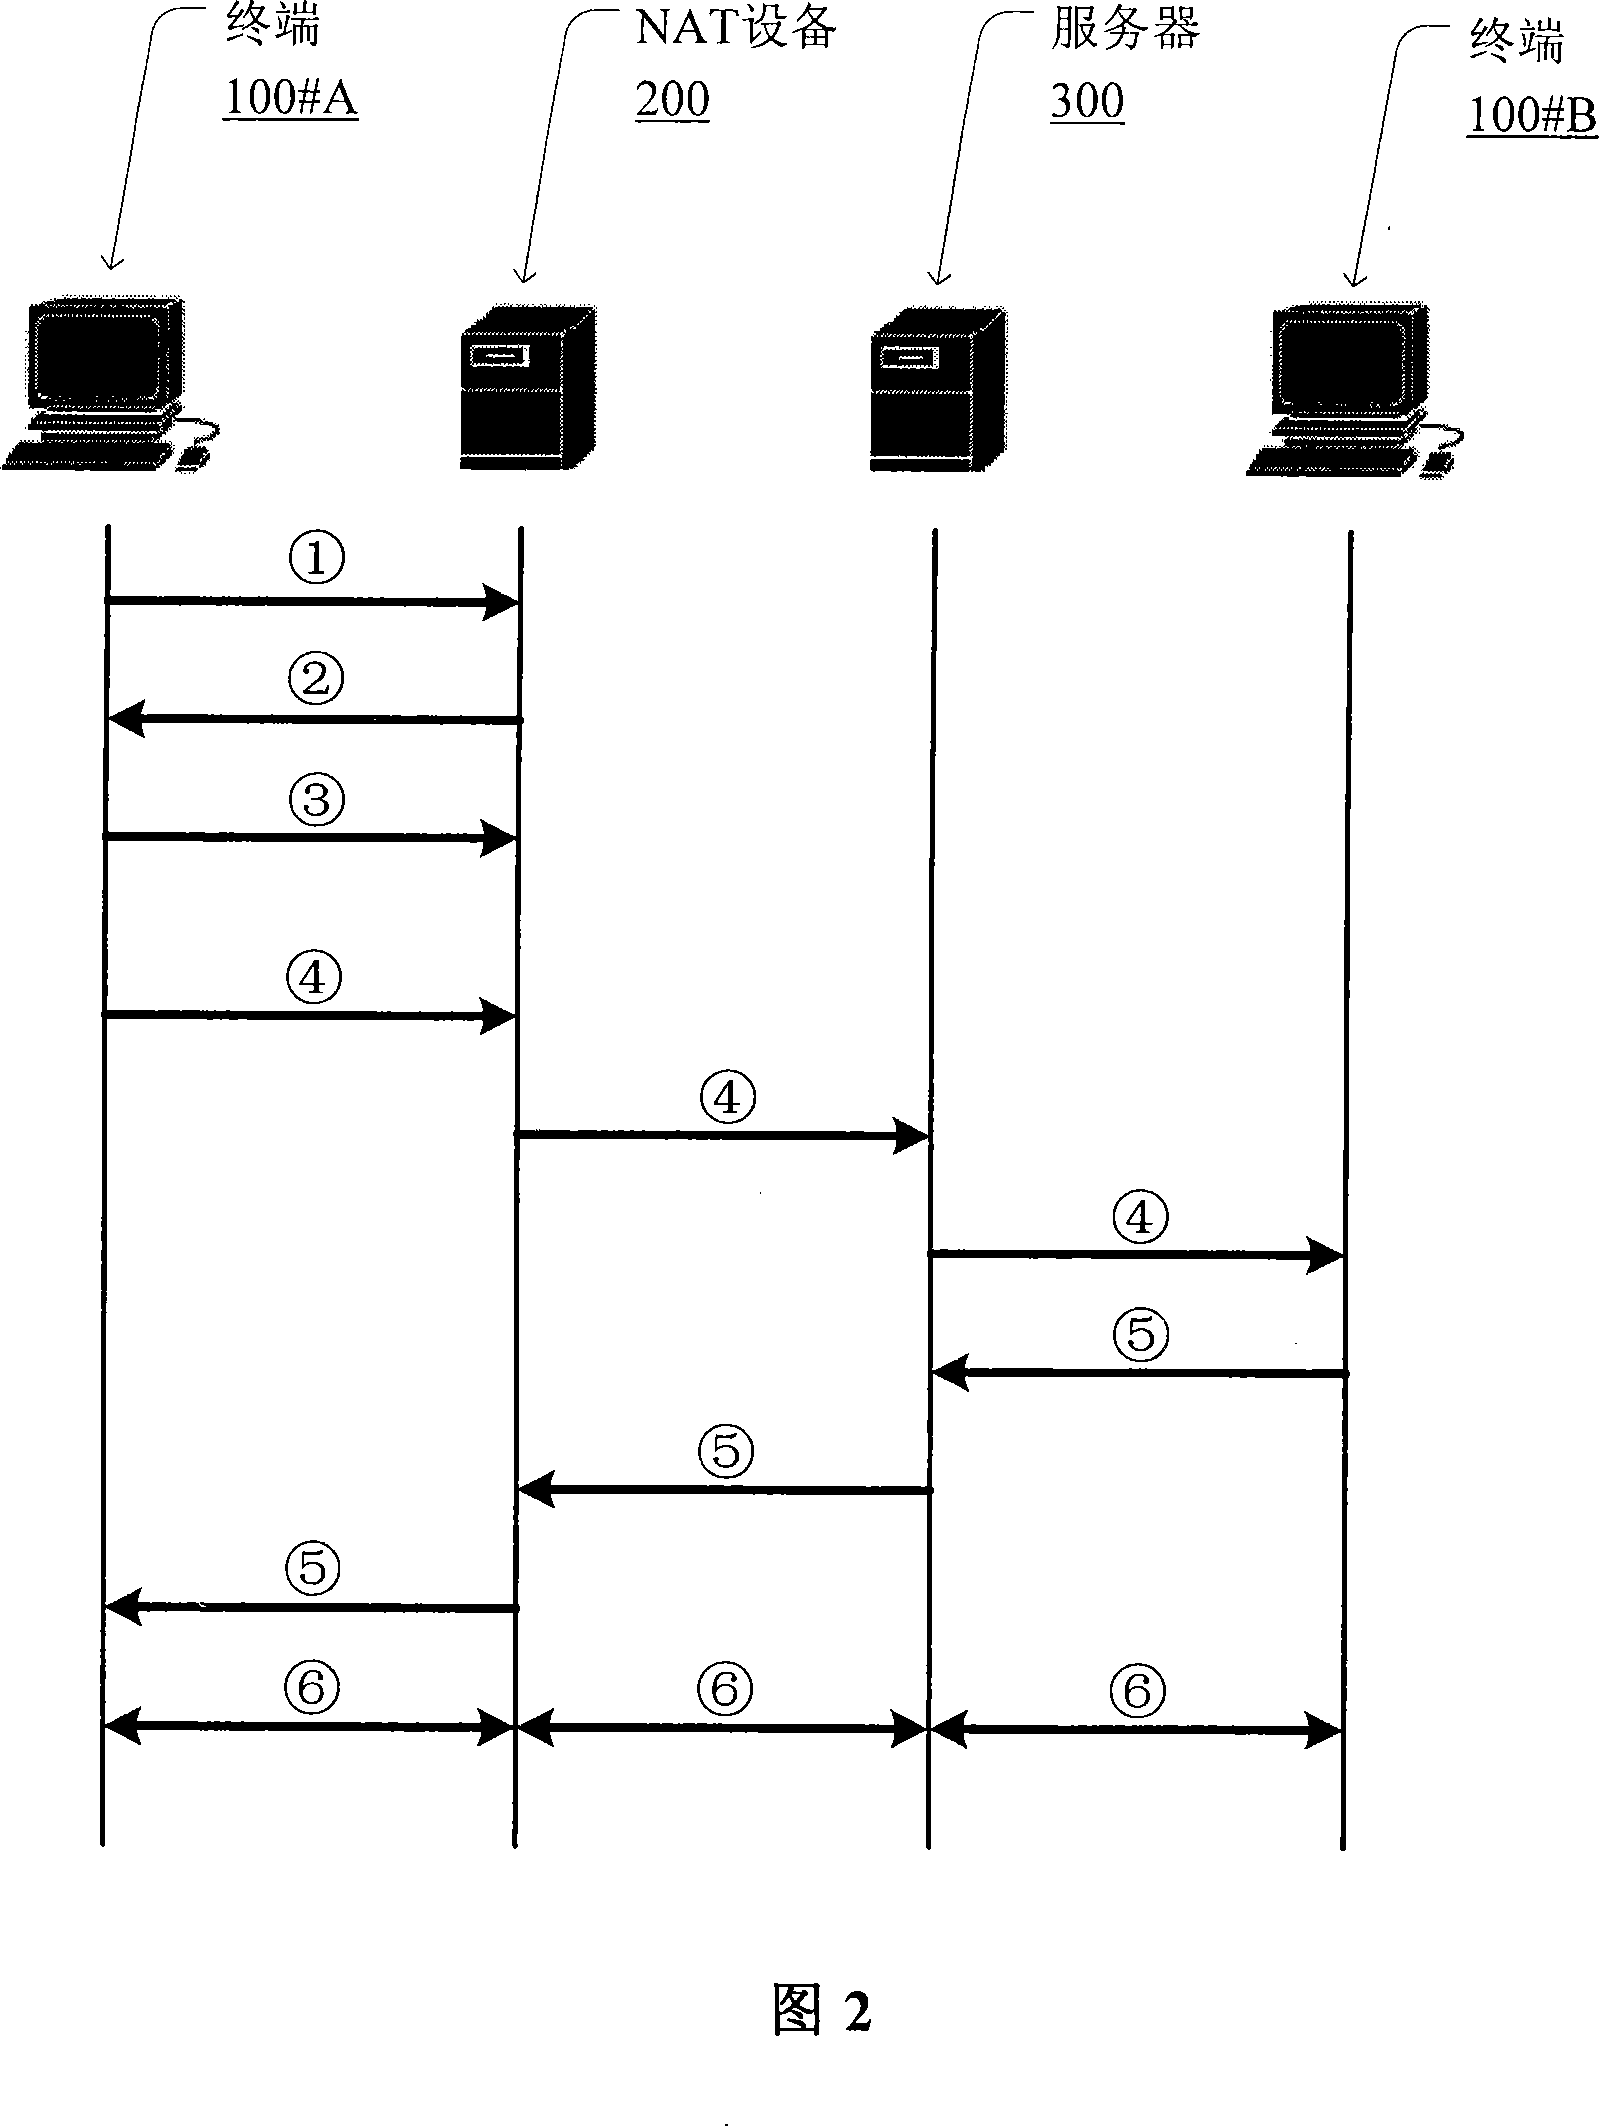 Method for penetrating the NAT and corresponding communication terminal and NAT device